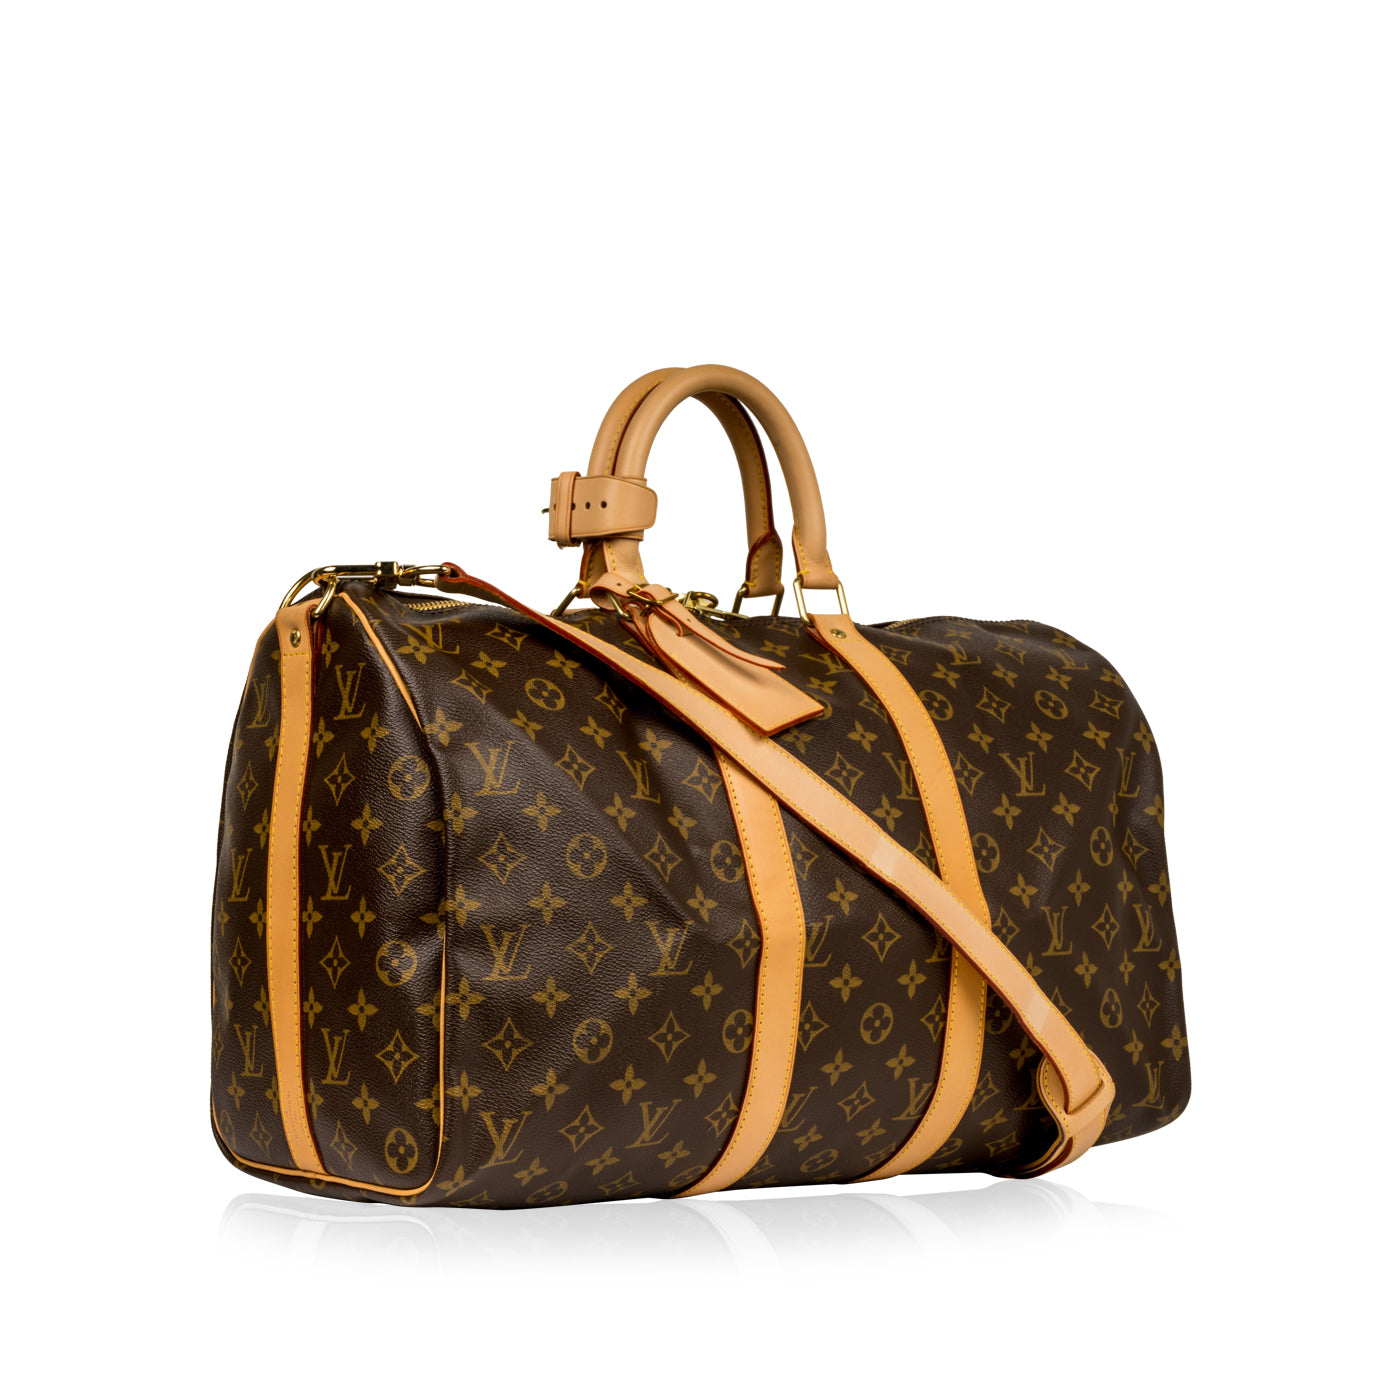 NBA Brown and White Monogram Canvas Keepall Bandouliere 55 Gold Hardware,  2020